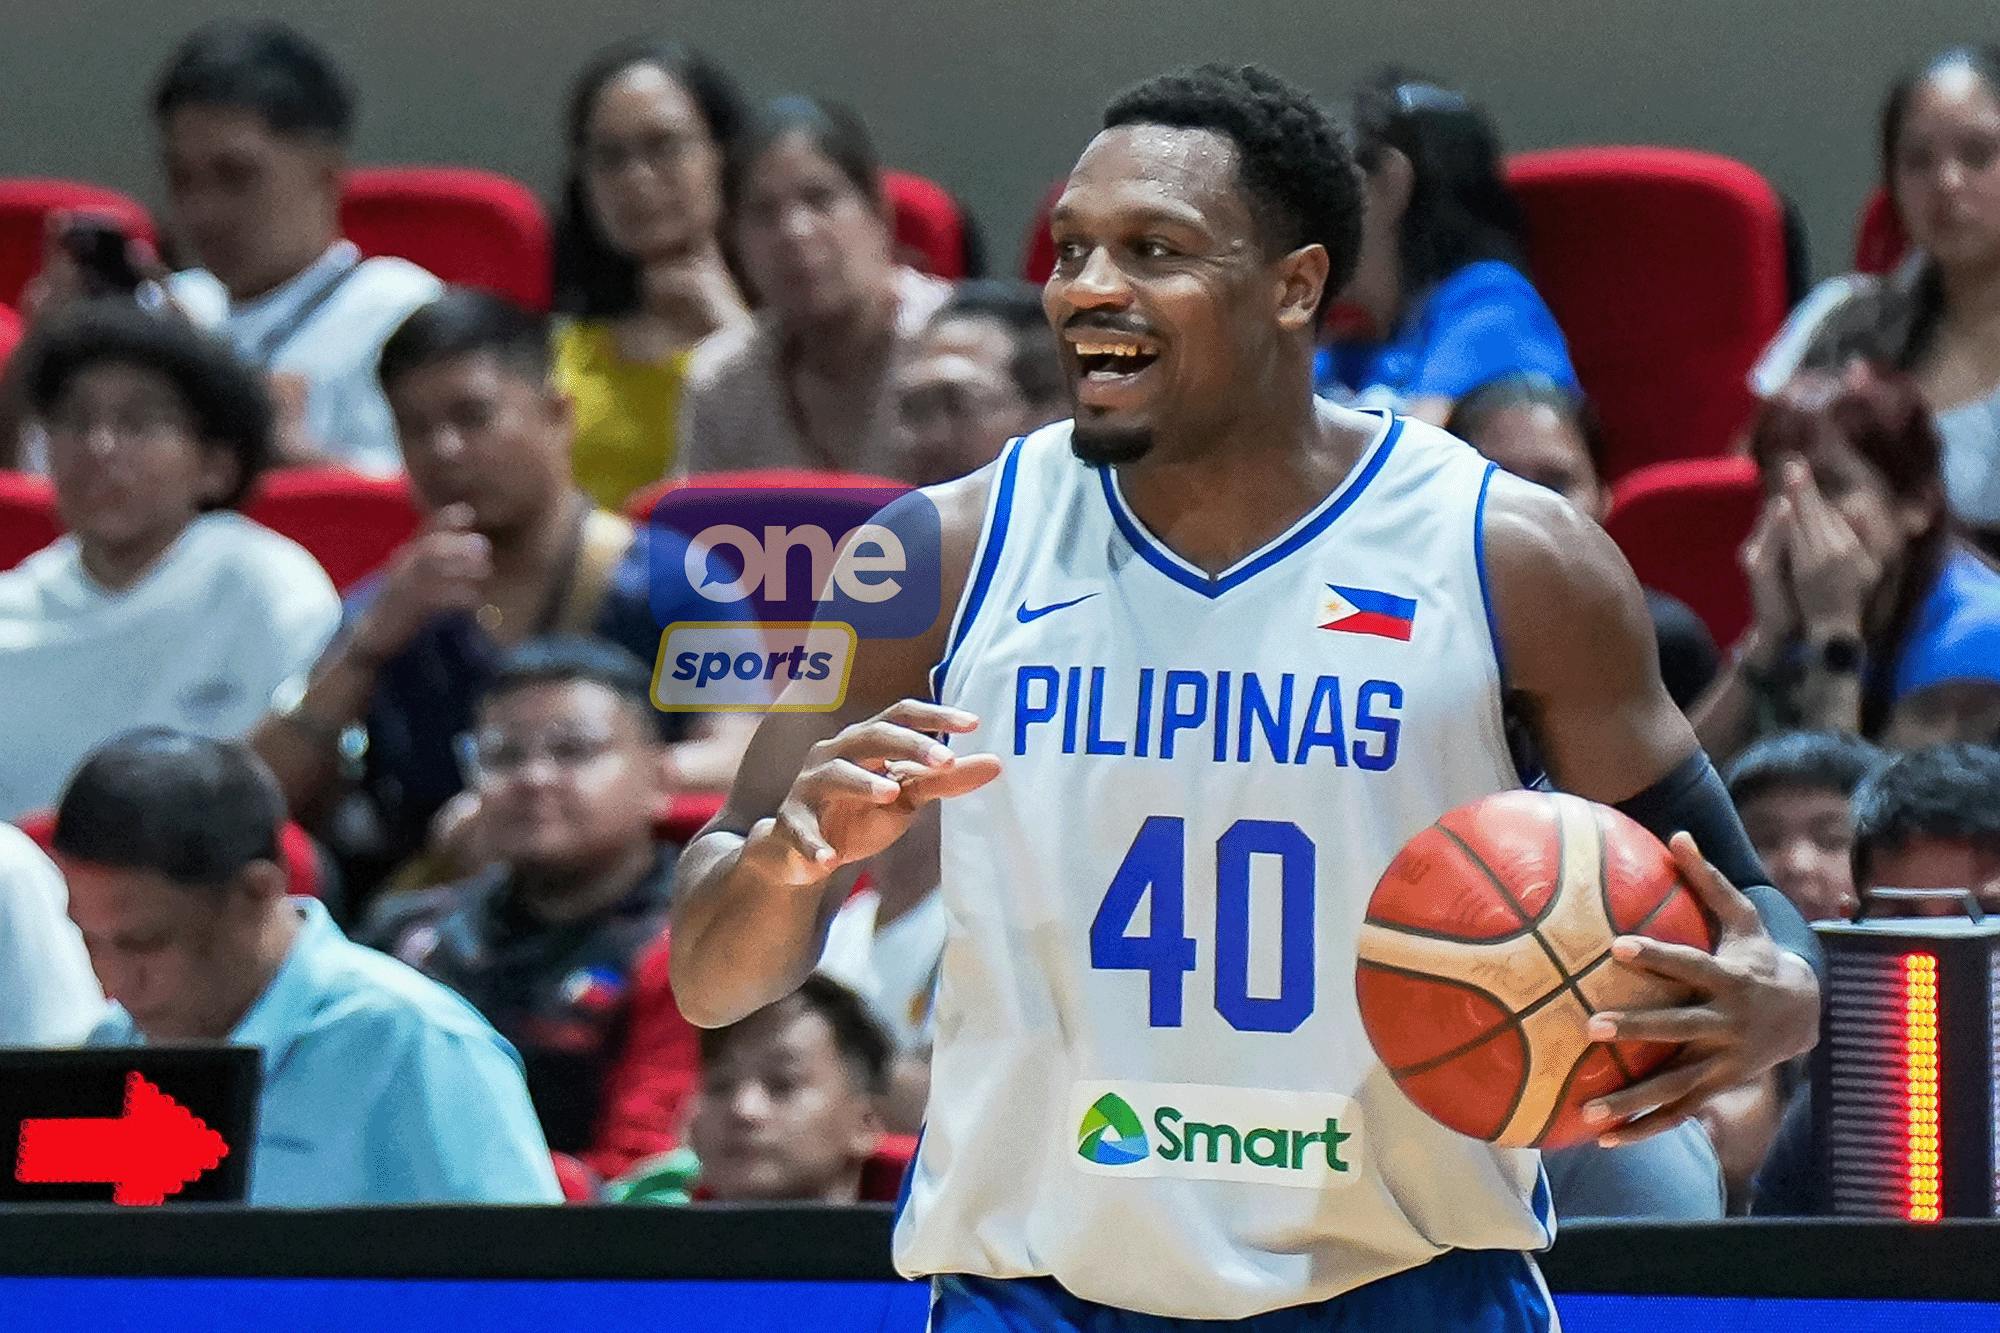 ‘Almost is not enough’: Team manager Richard del Rosario speaks after Gilas bows to Turkey in friendly